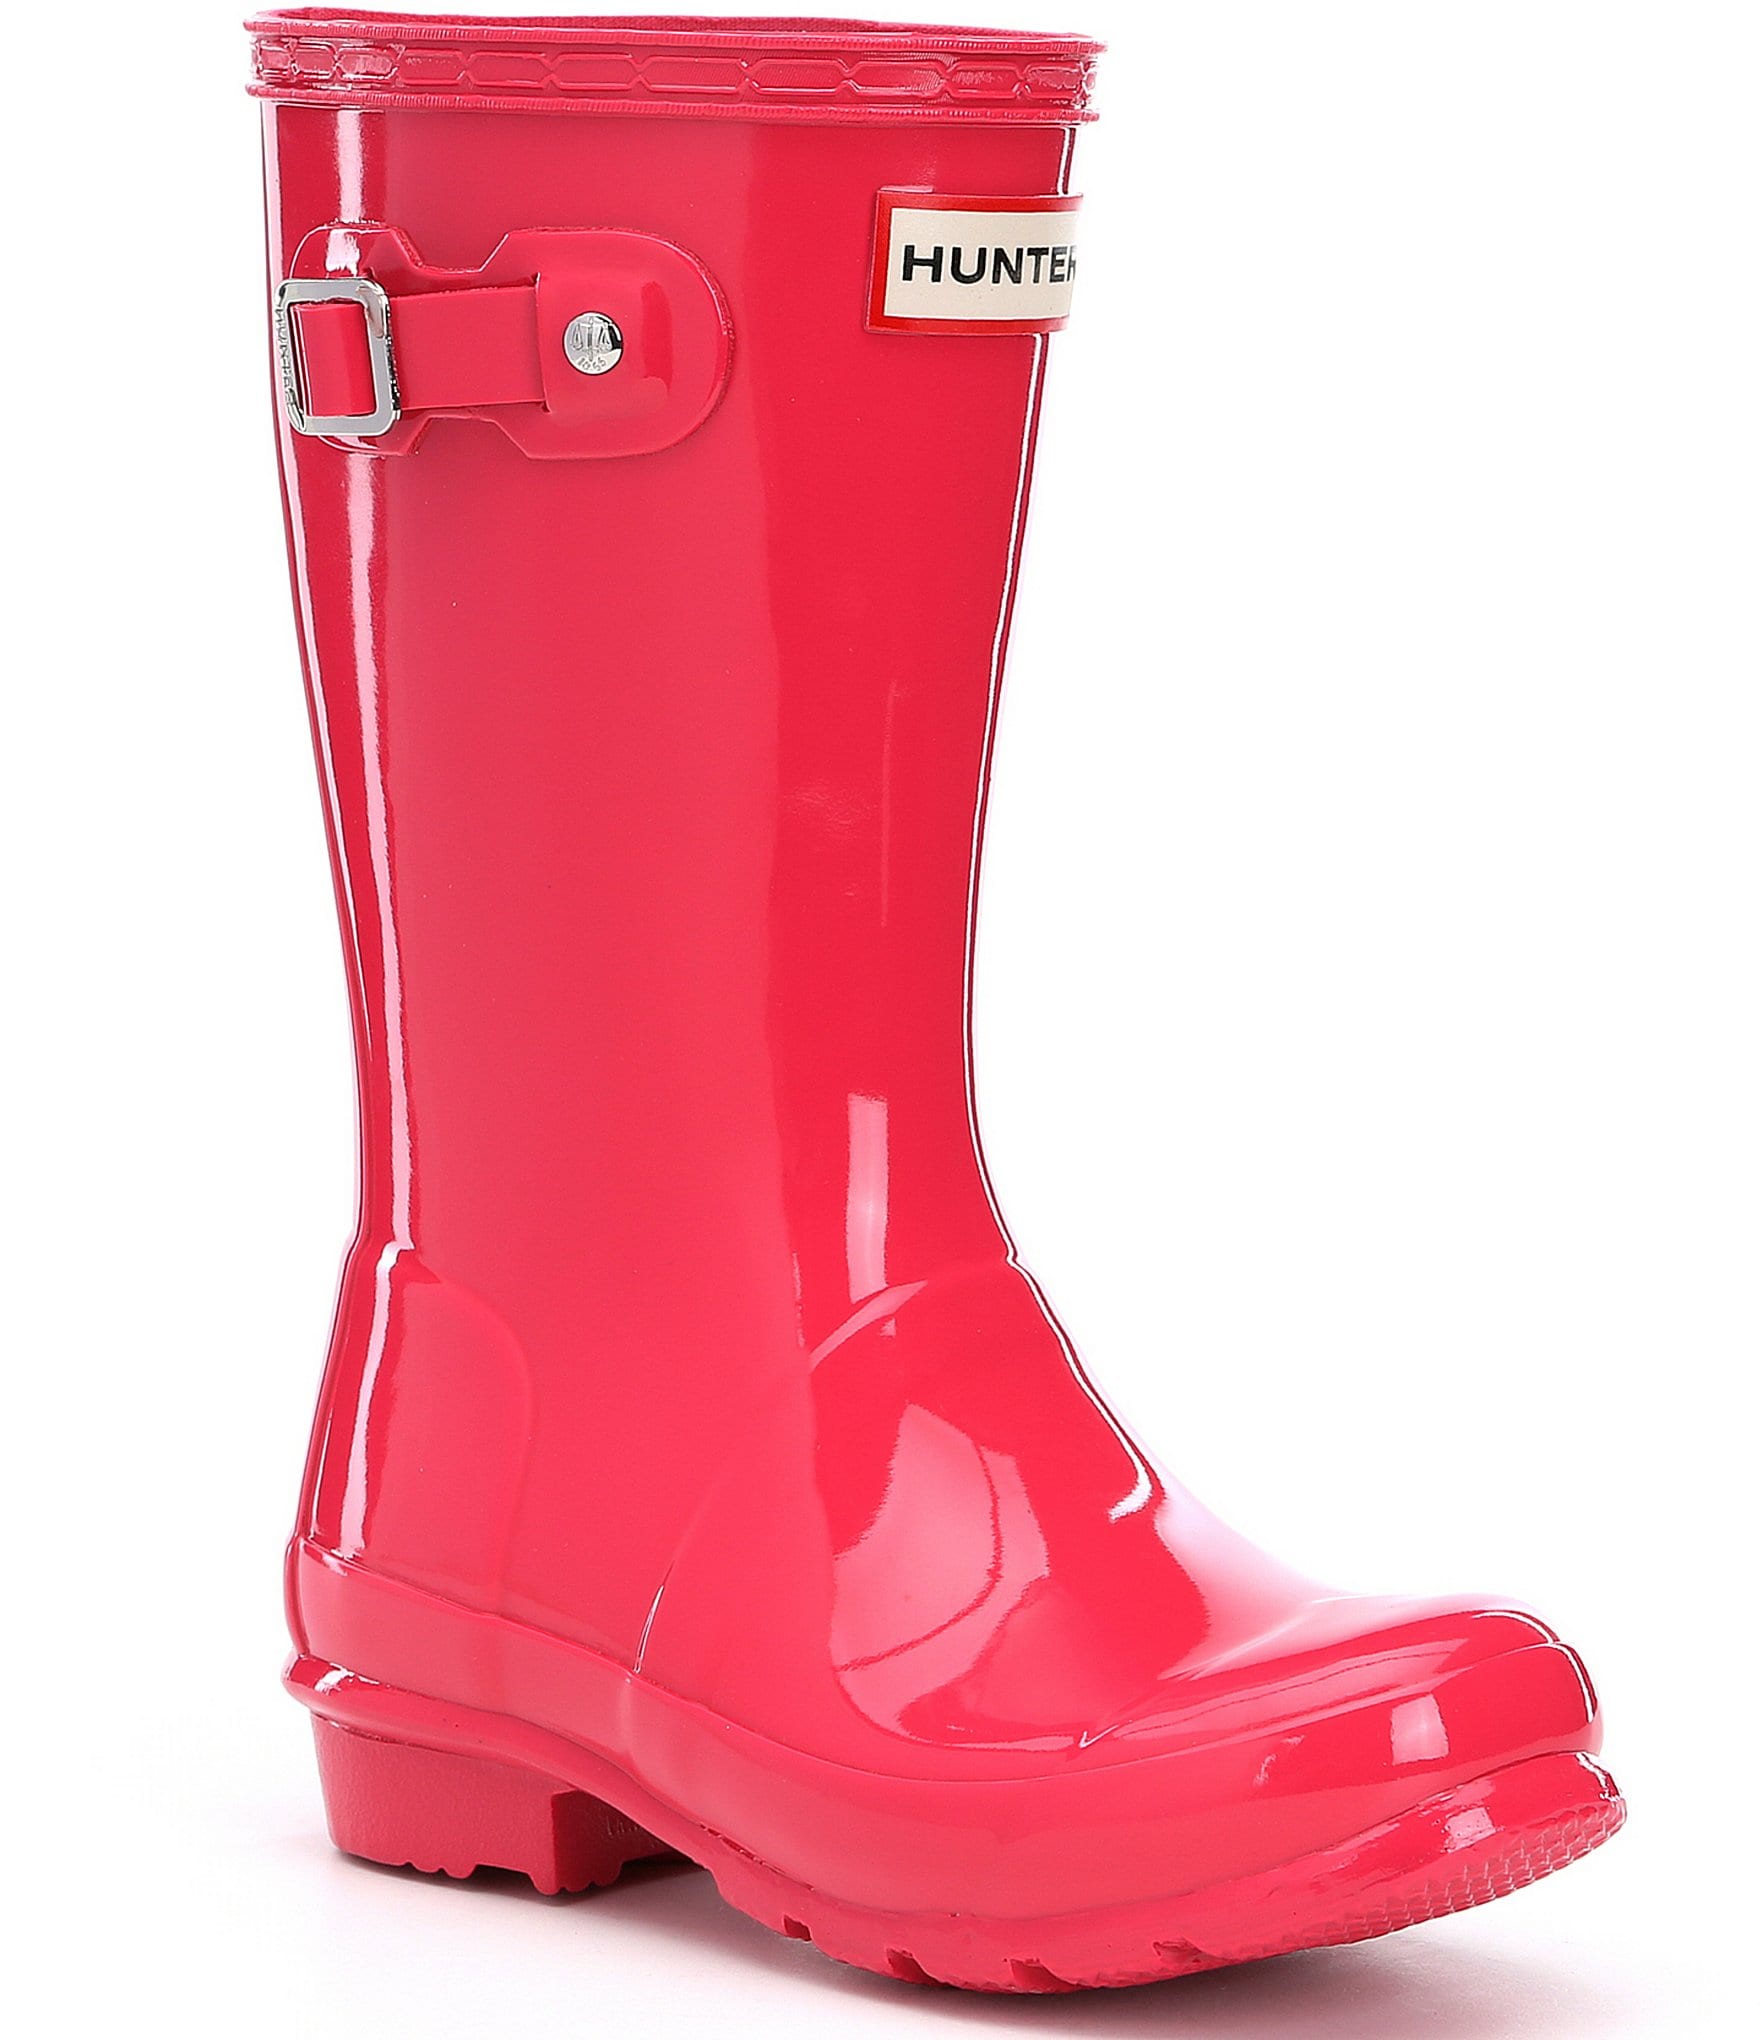 Buy > hunter boots new > in stock